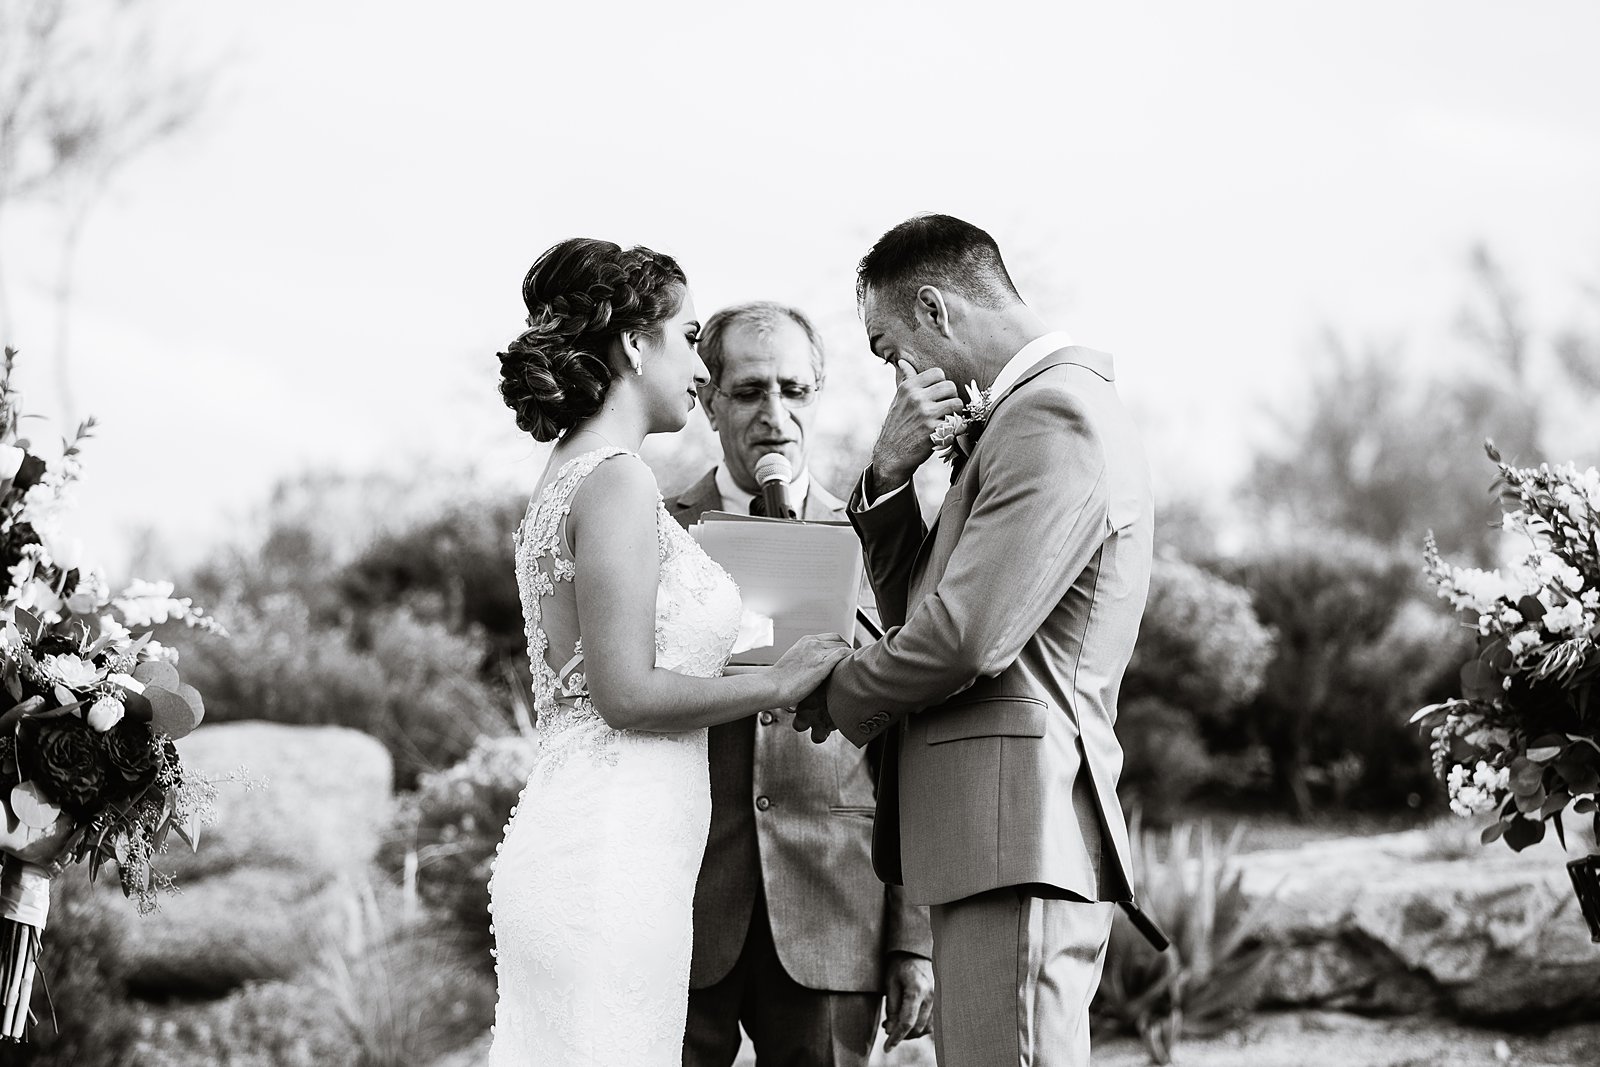 Groom wiping away a tear during the ring exchange wedding ceremony by Arizona wedding photographer PMA Photography.